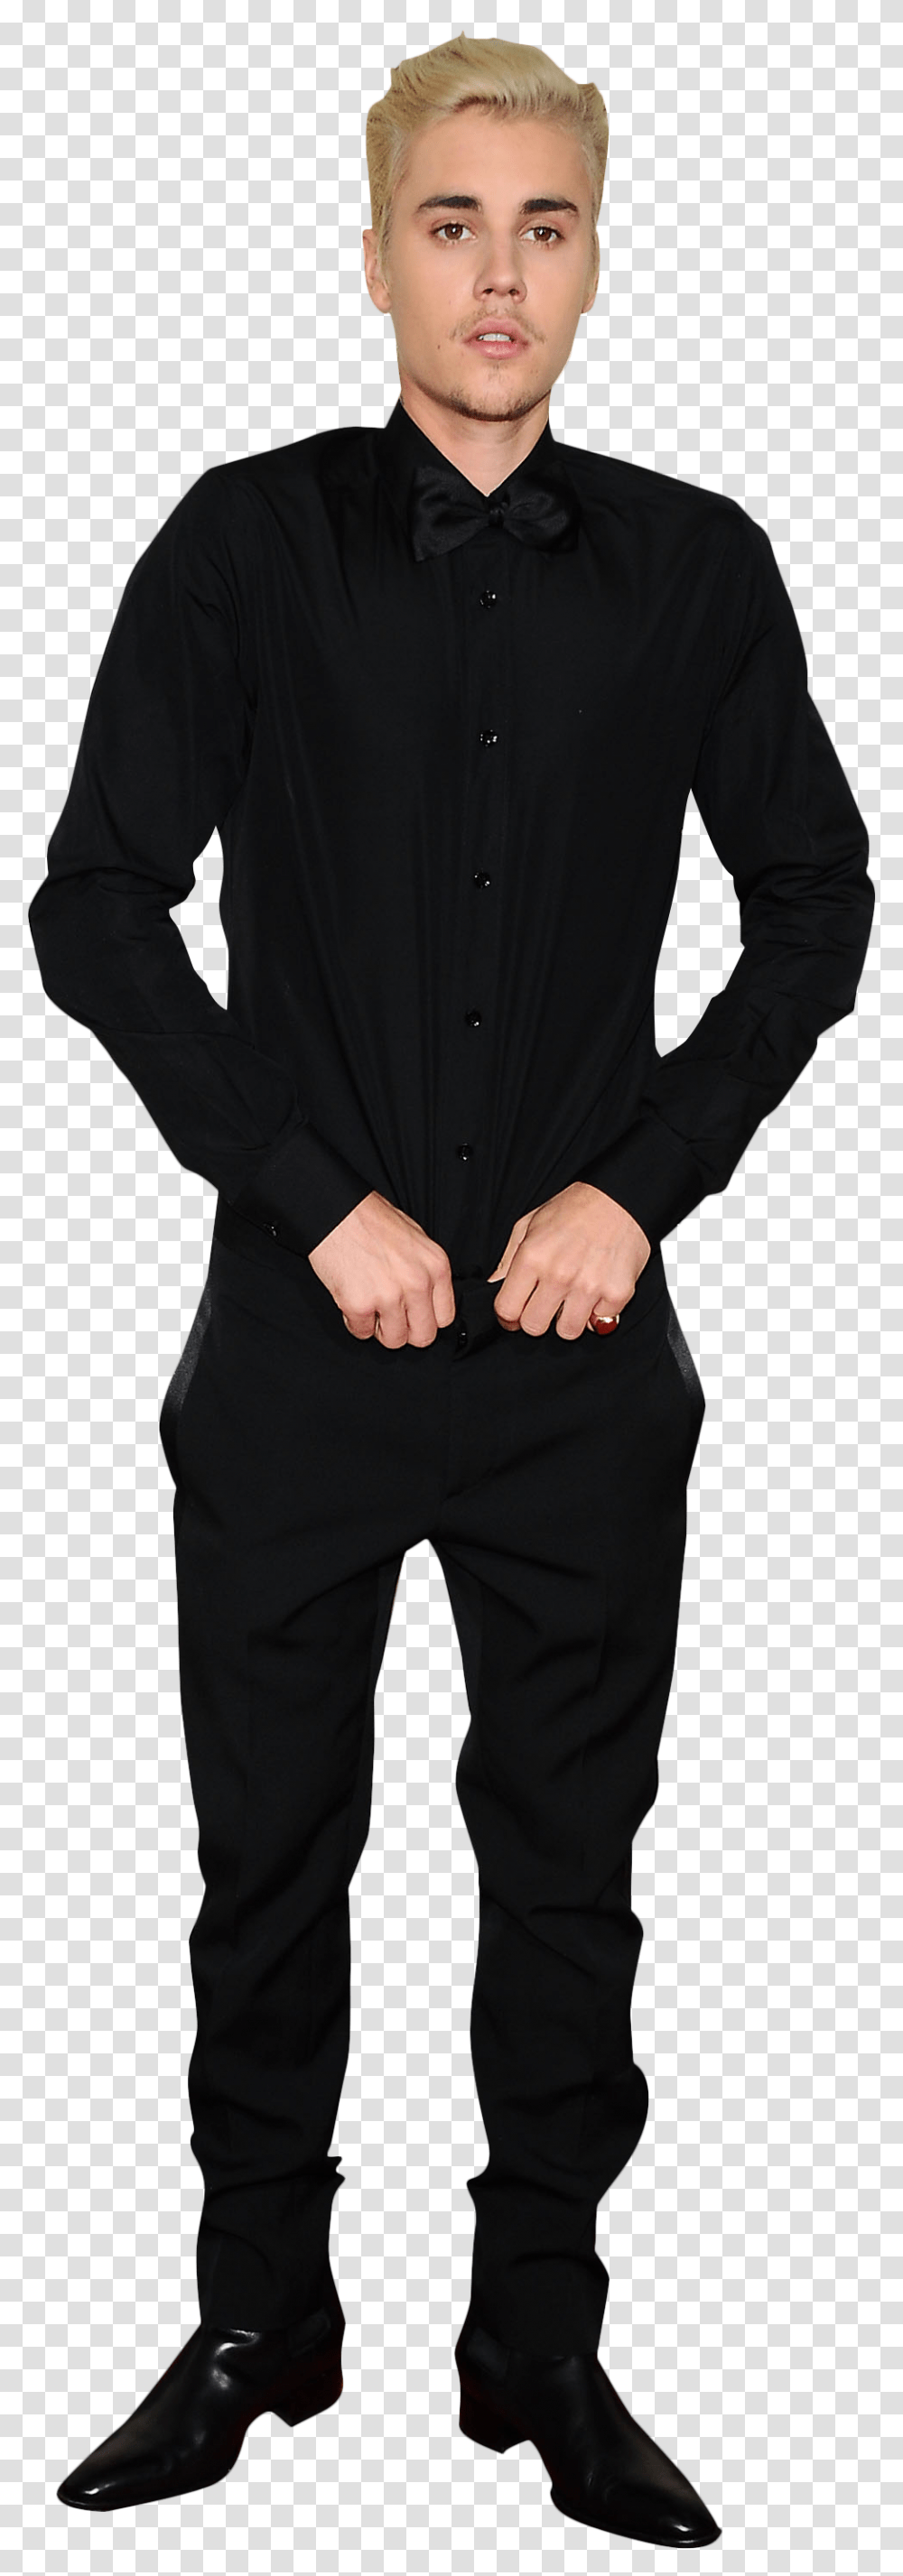 Download Justin Bieber In Black Image For Free Portable Network Graphics, Clothing, Apparel, Suit, Overcoat Transparent Png